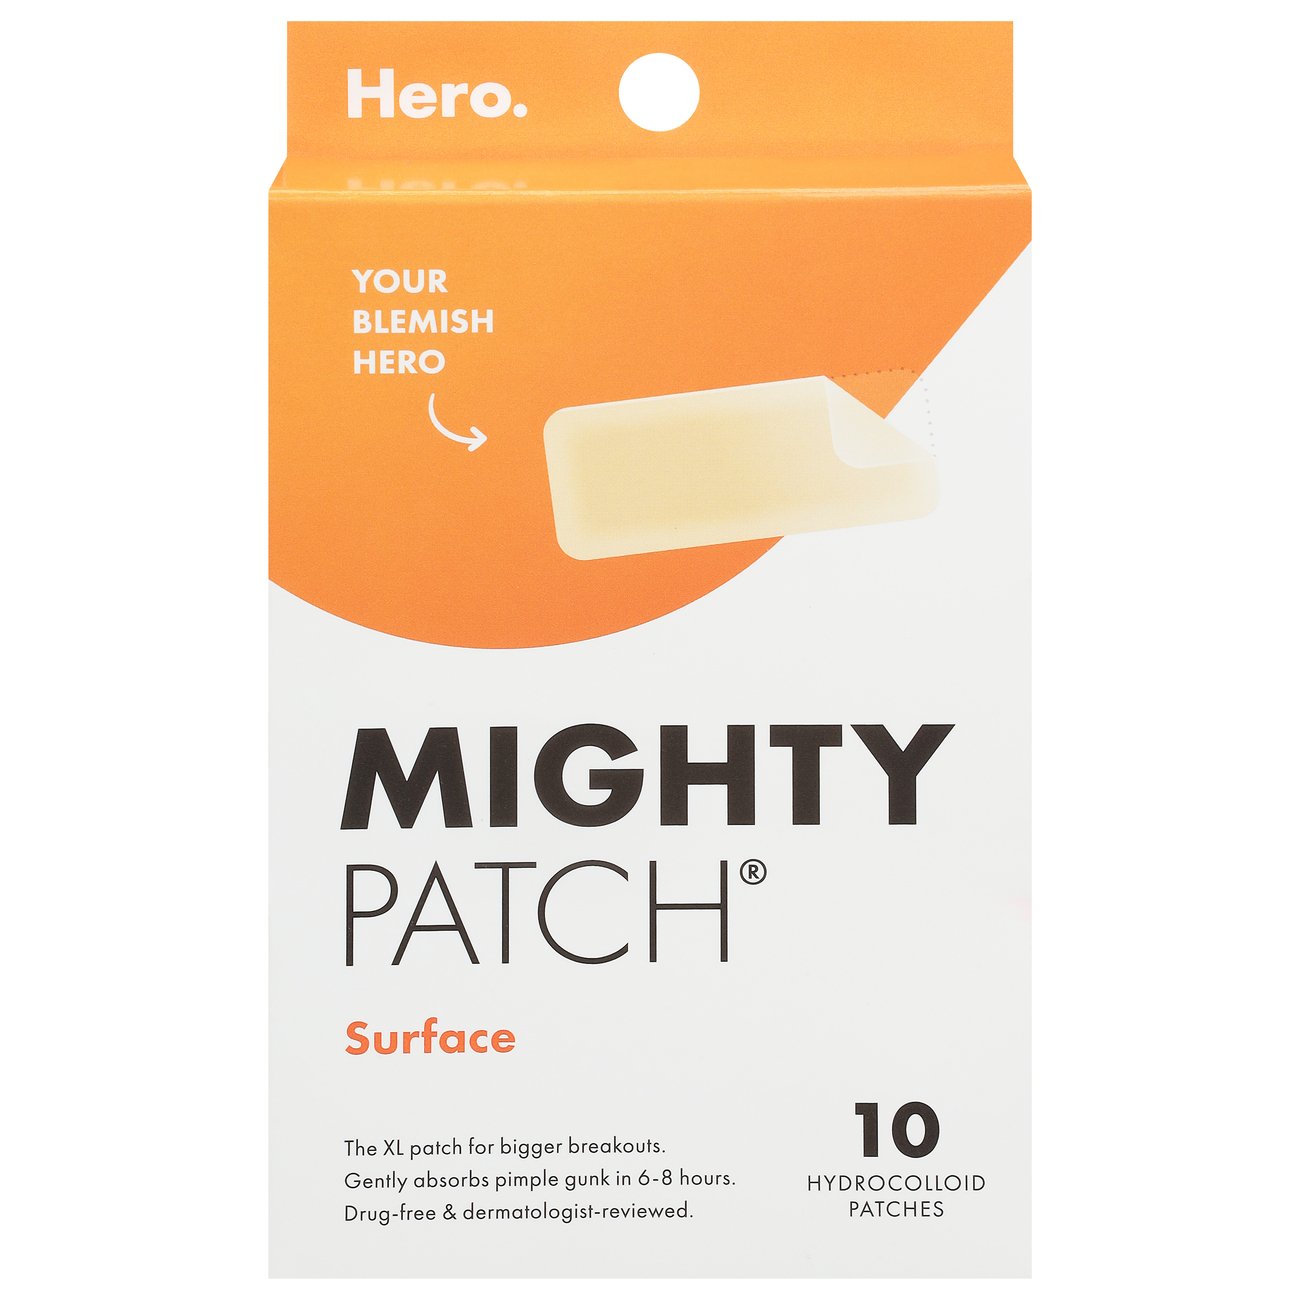 How To Use Hydrocolloid Patches With Prescriptions Feat. Hero